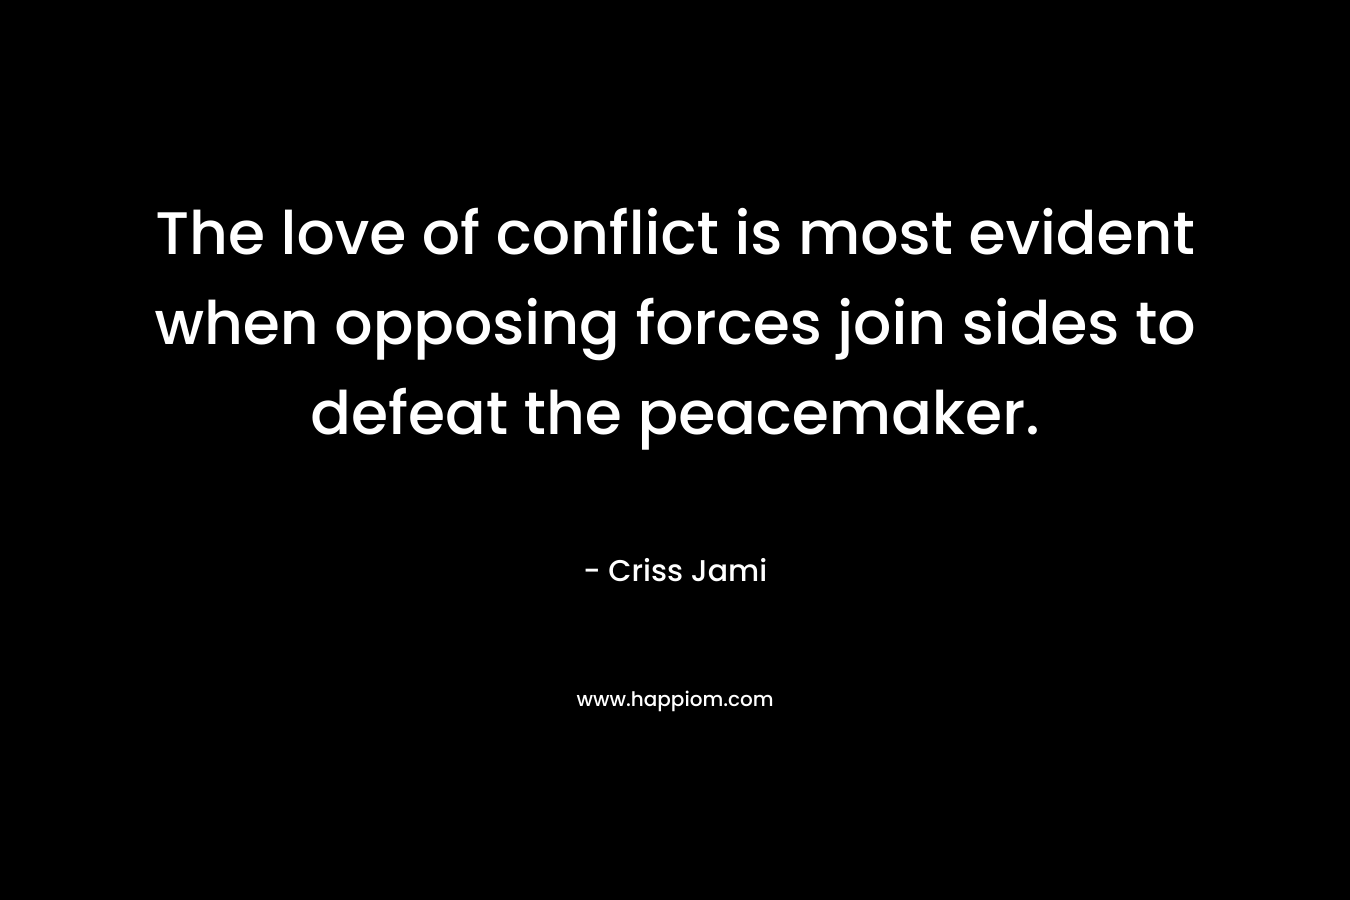 The love of conflict is most evident when opposing forces join sides to defeat the peacemaker.